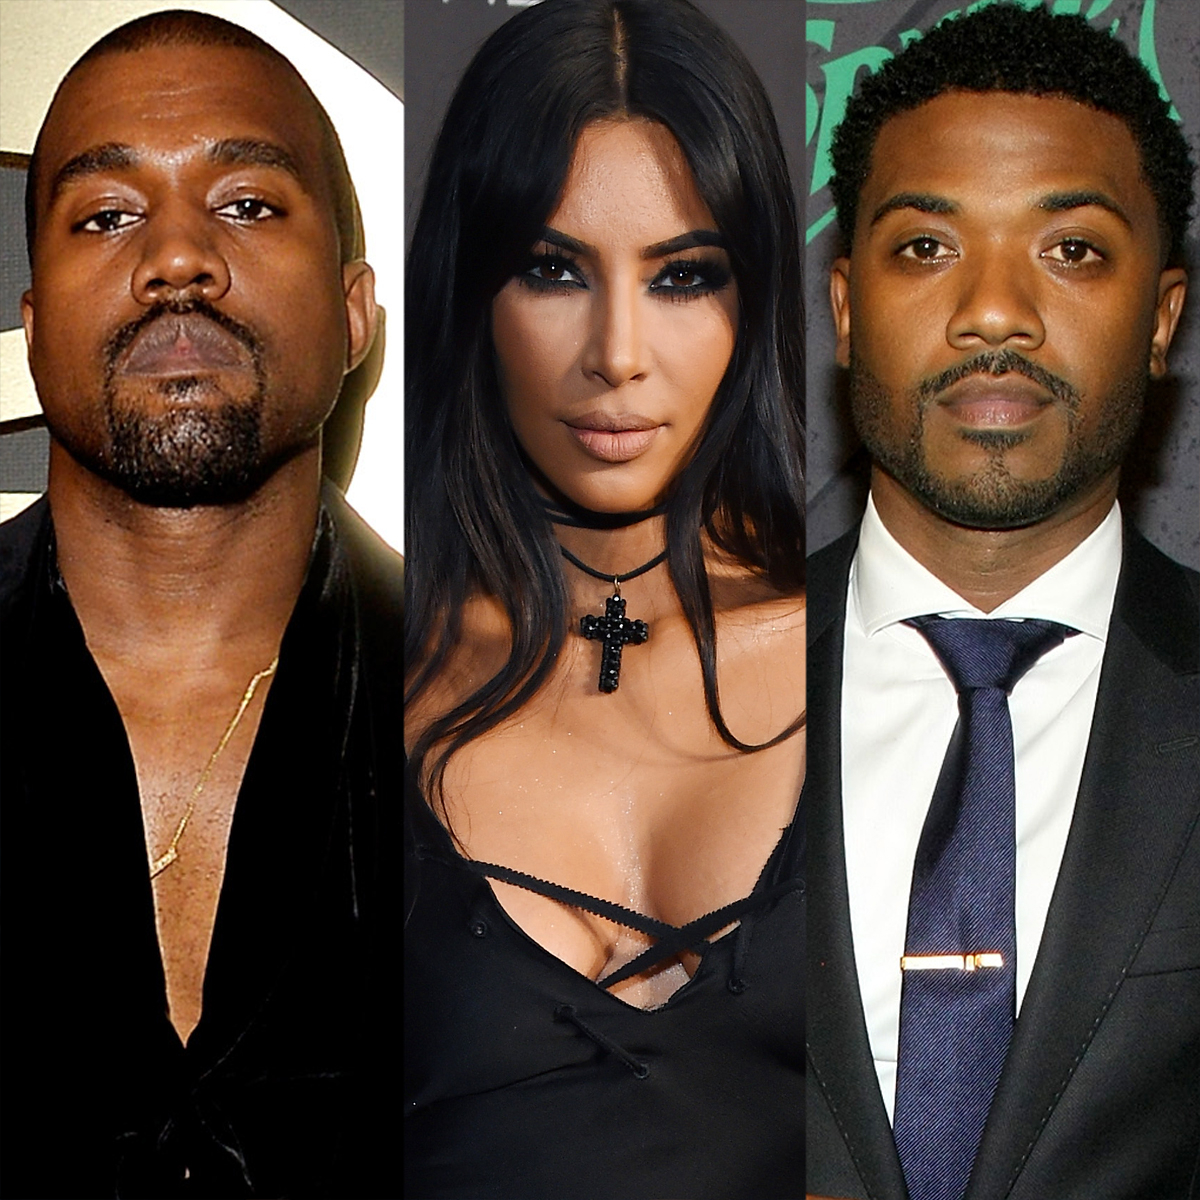 Ray J Calls Out Claim About Kanye Giving Sex Tape to Kim Kardashian